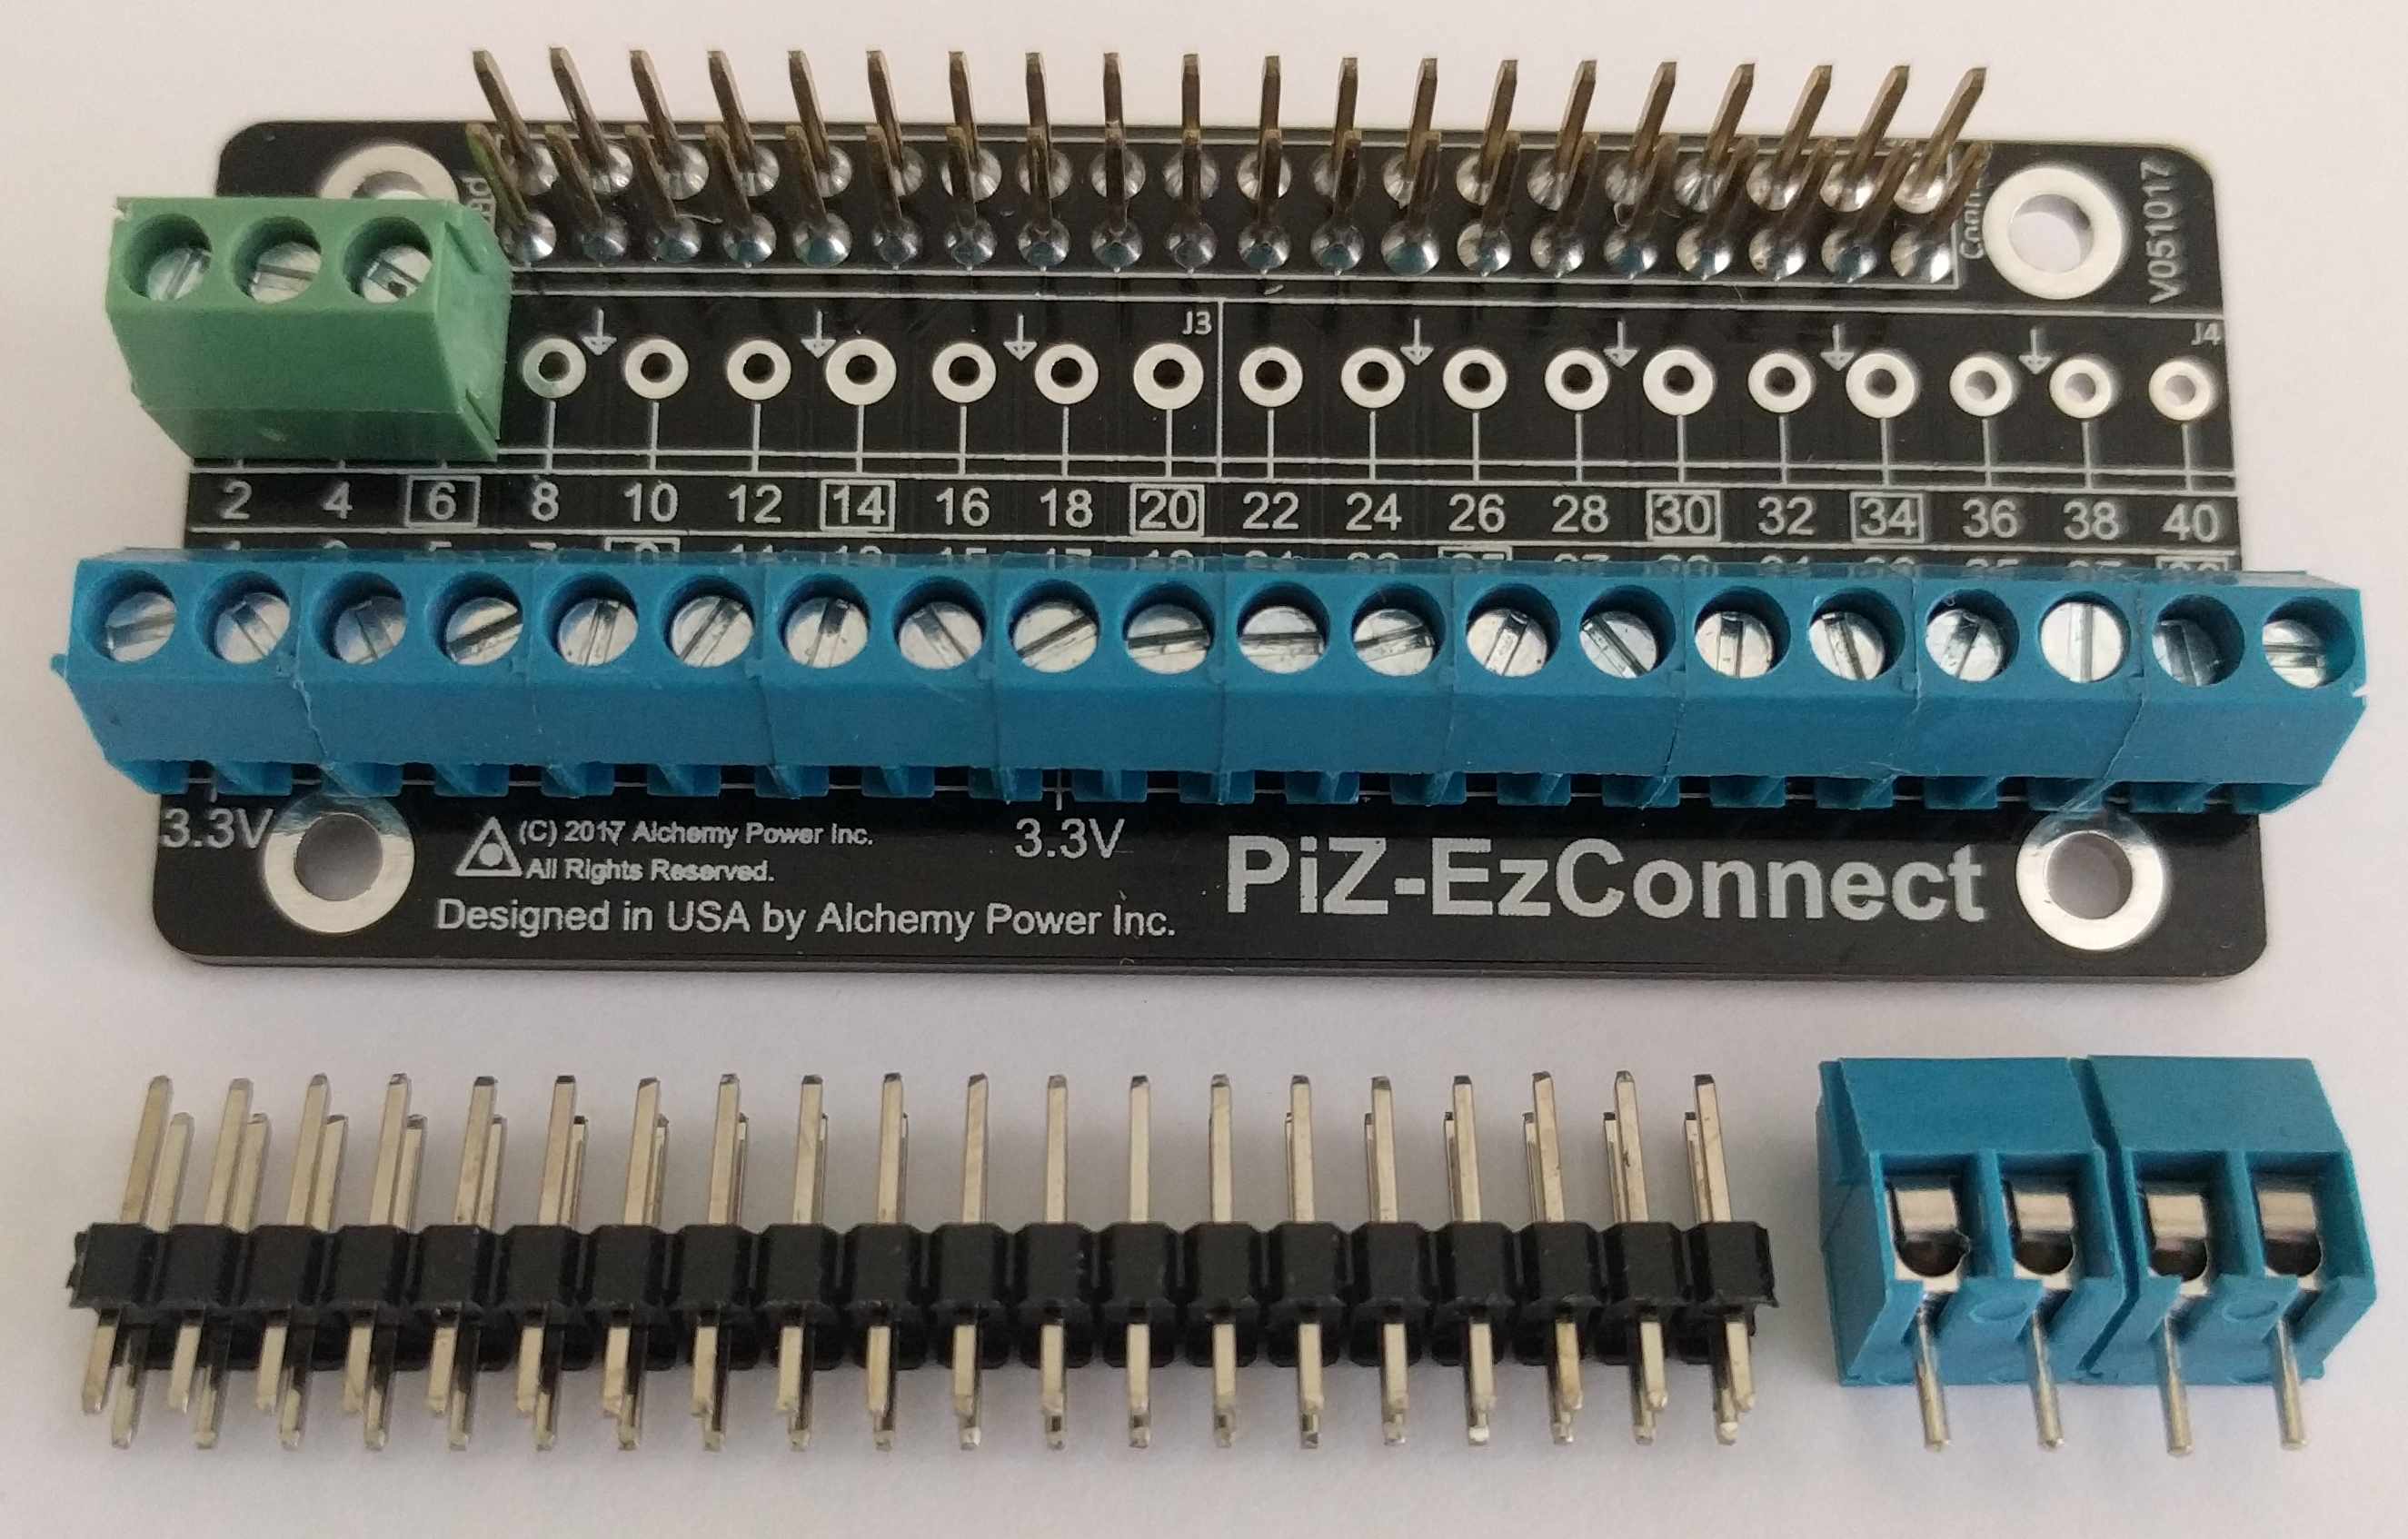 PiZ-EzConnect with header pins and additional terminal blocks